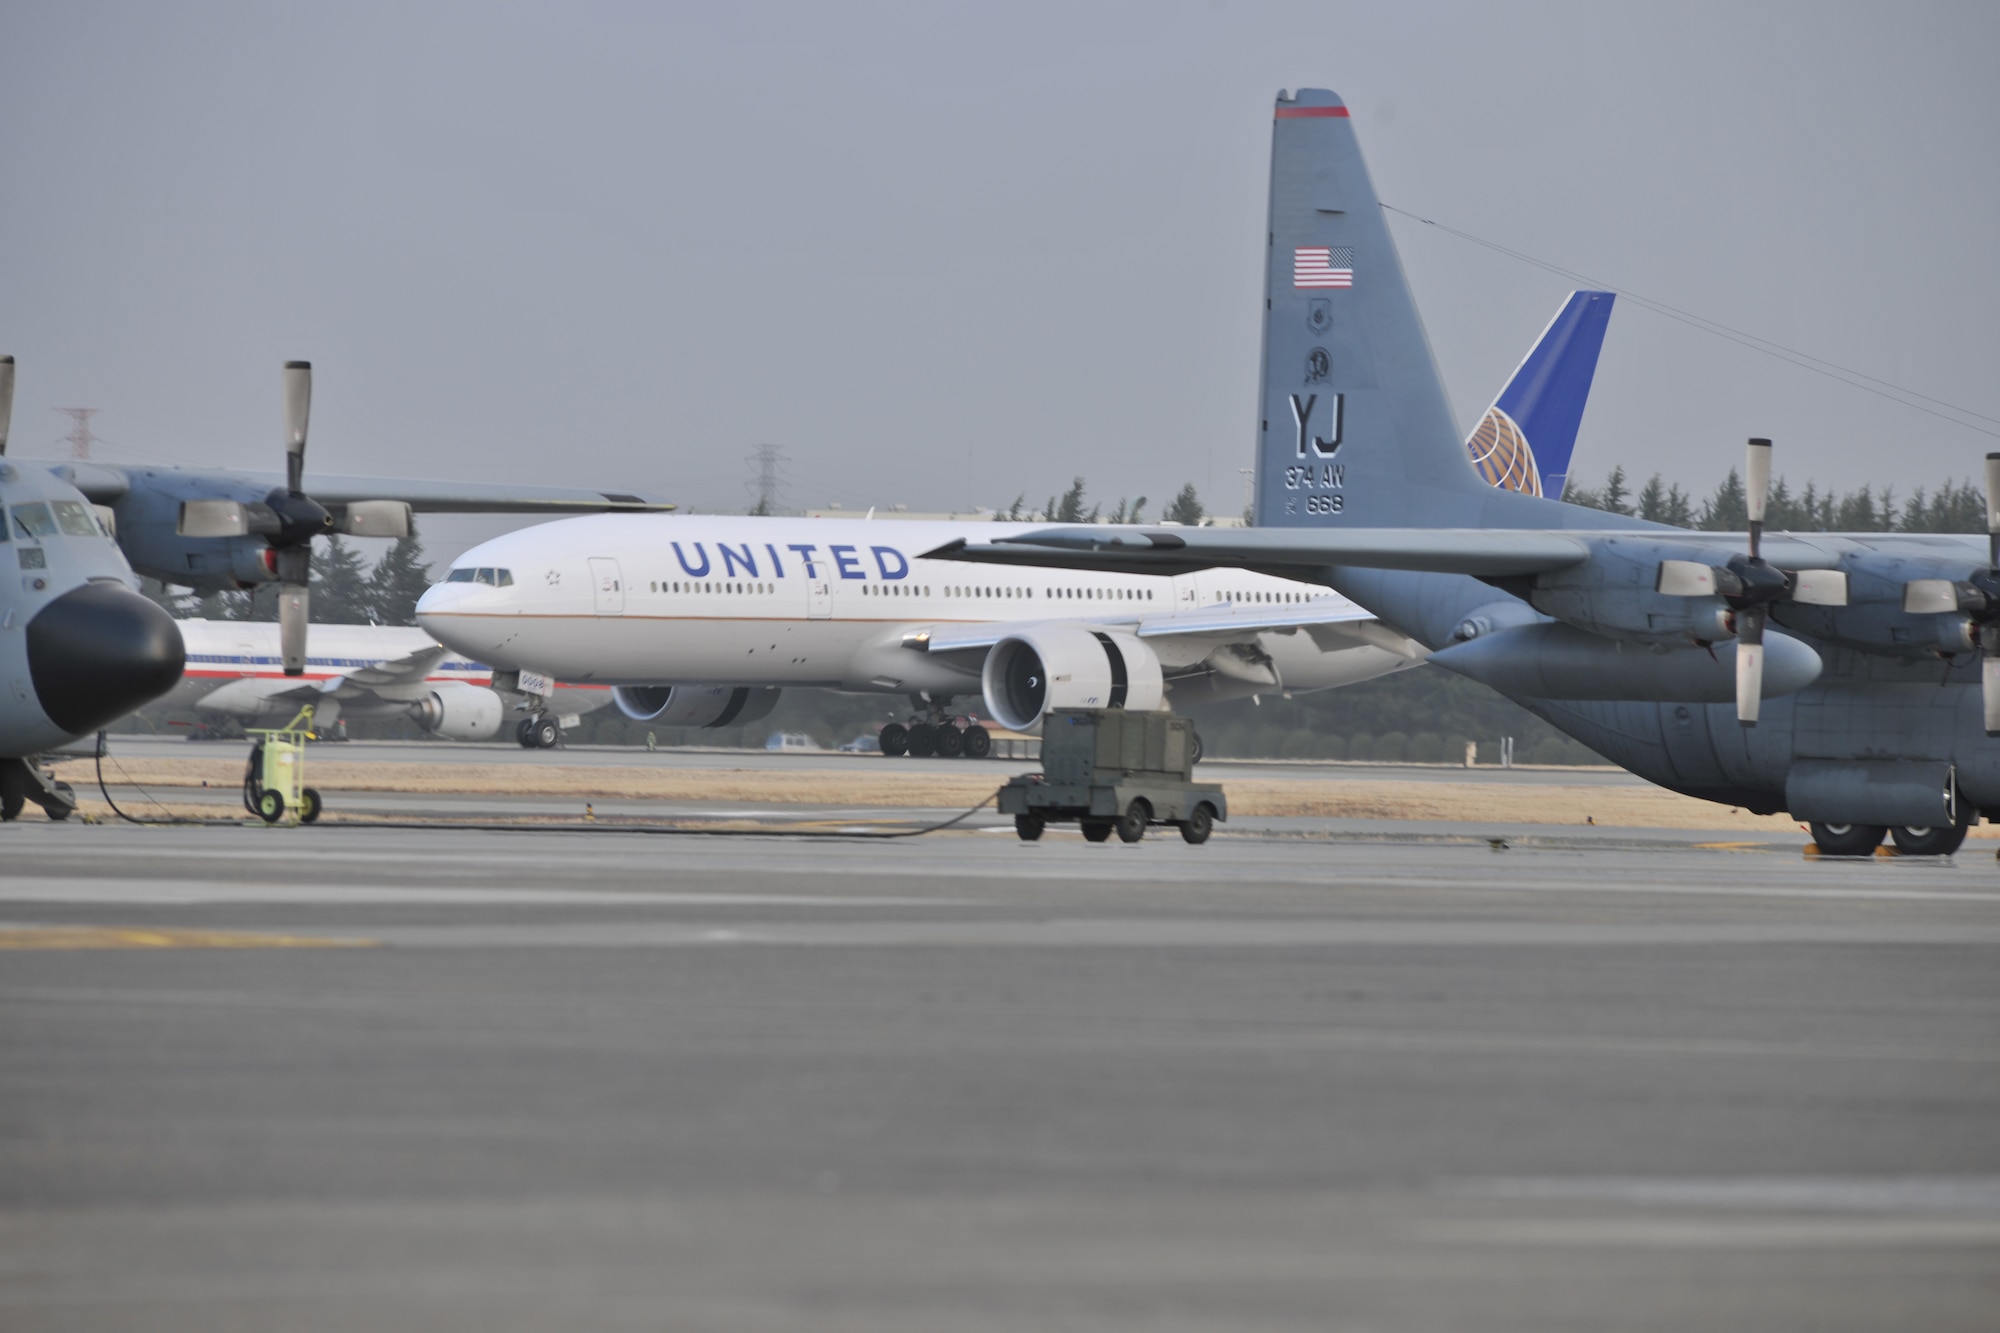 A United Airlines flight lands here March 11, after diverting from Narita International Airport, Tokyo, Japan. Yokota opened its airfield after an earthquake struck near Tokyo. (U.S. Air Force photo/Master Sgt. Kimberly Spinner)